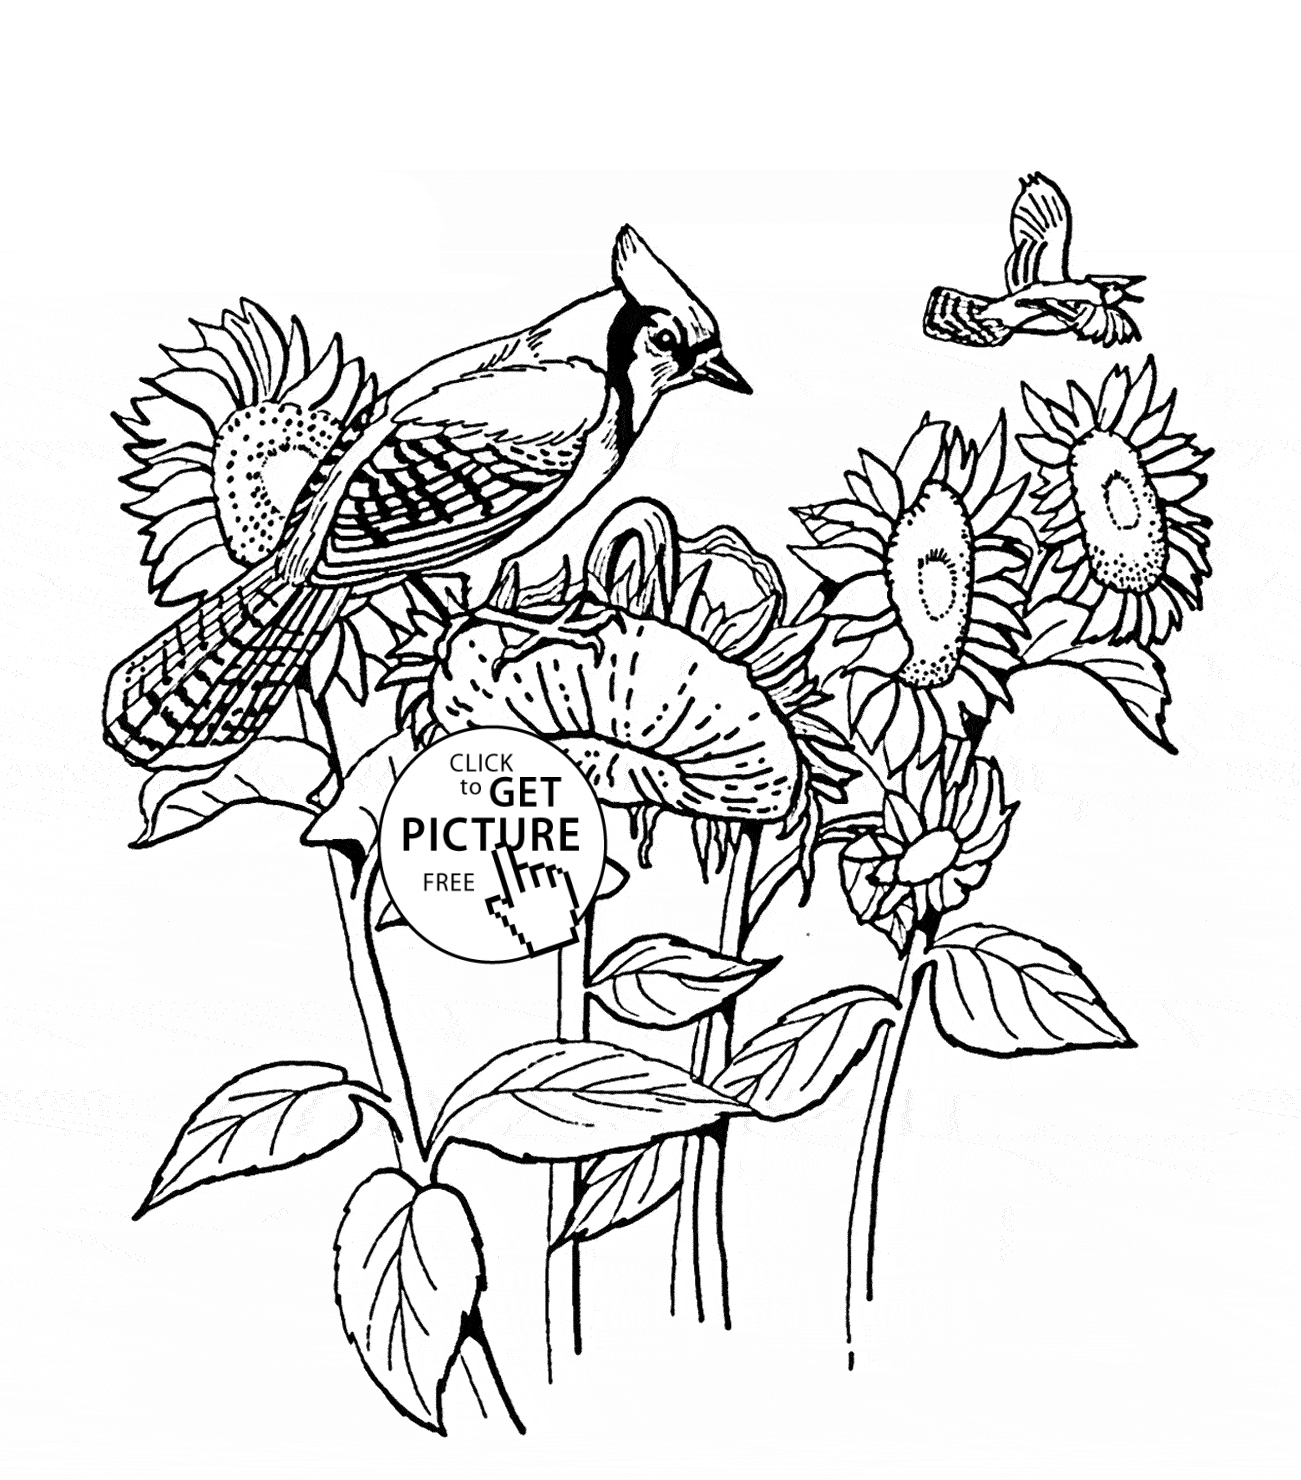 Blue Flower Coloring Page - Coloring Pages For All Ages